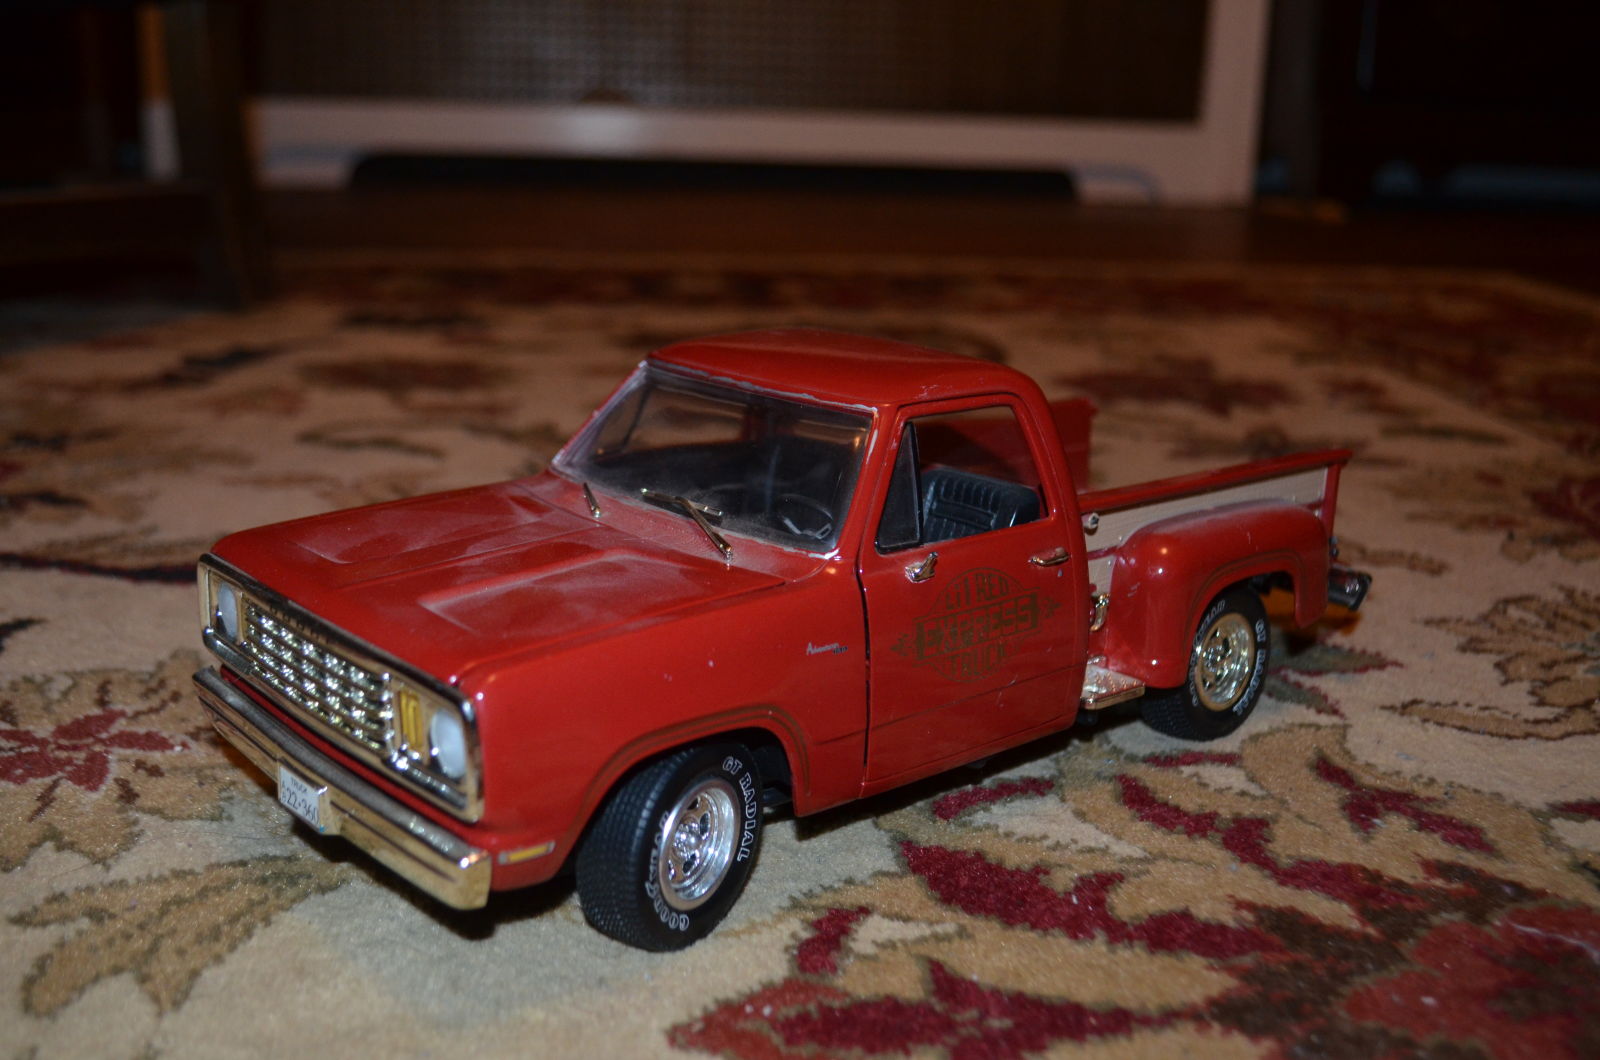  1/18 Dodge “Little Red Wagon” pickup. Missing stacks, side mirrors and one wiper. Probably parts or custom fodder at best.  